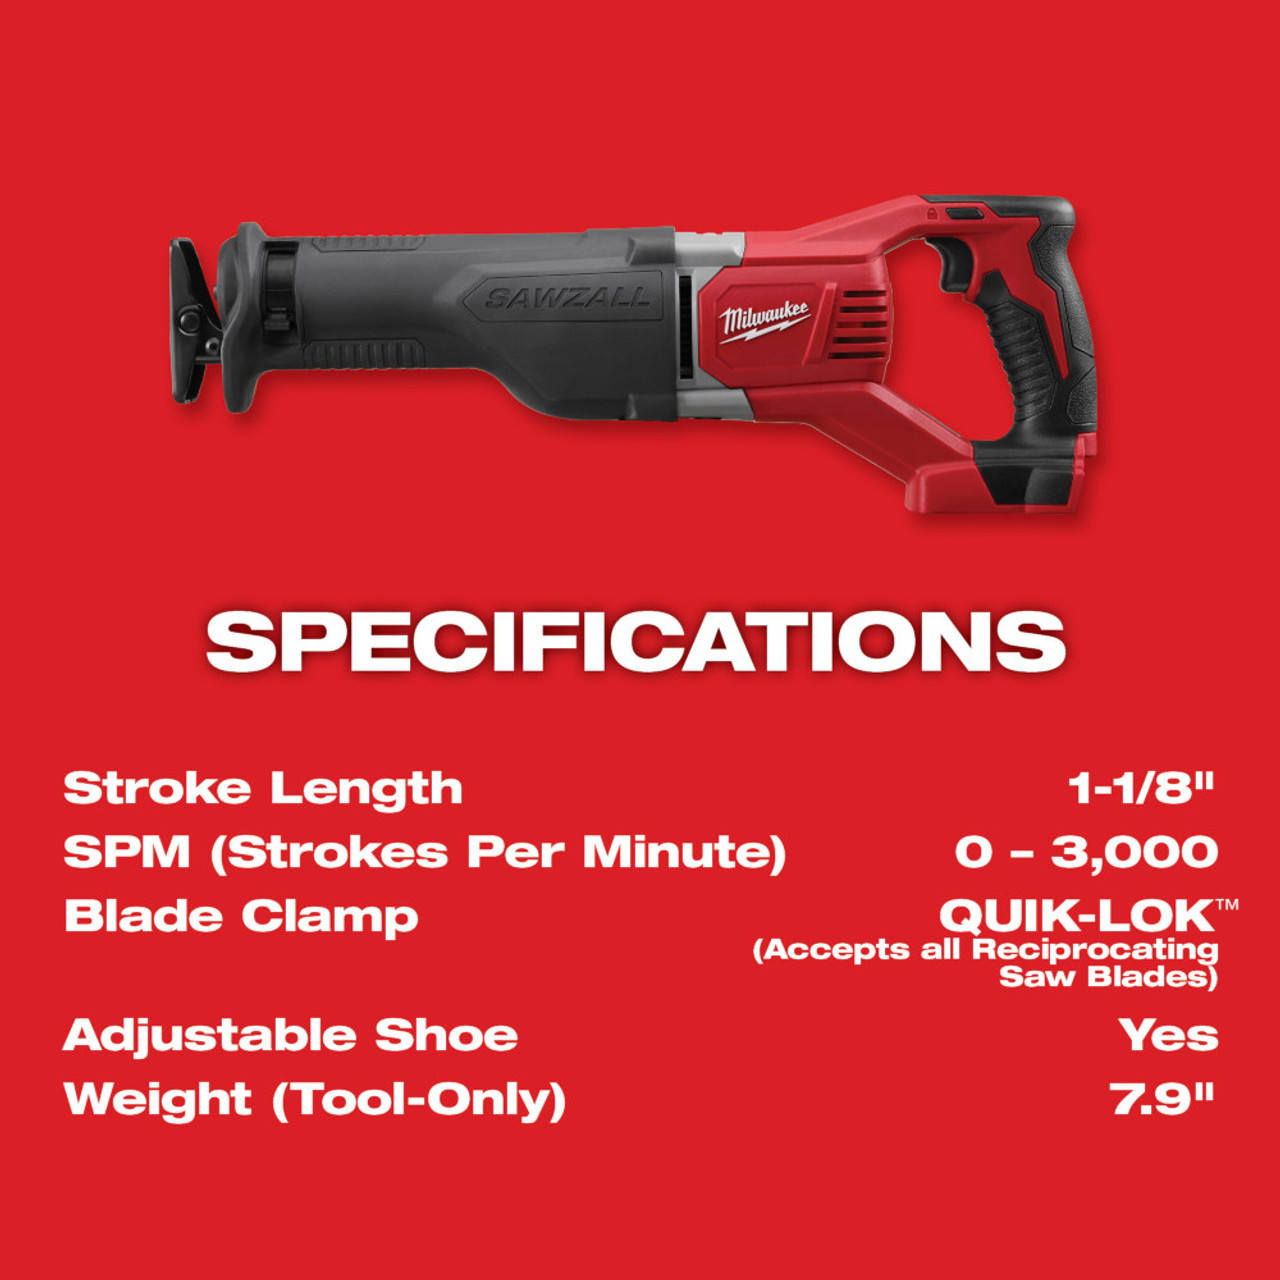 M18 SAWZALL Reciprocating Saw (Tool Only)